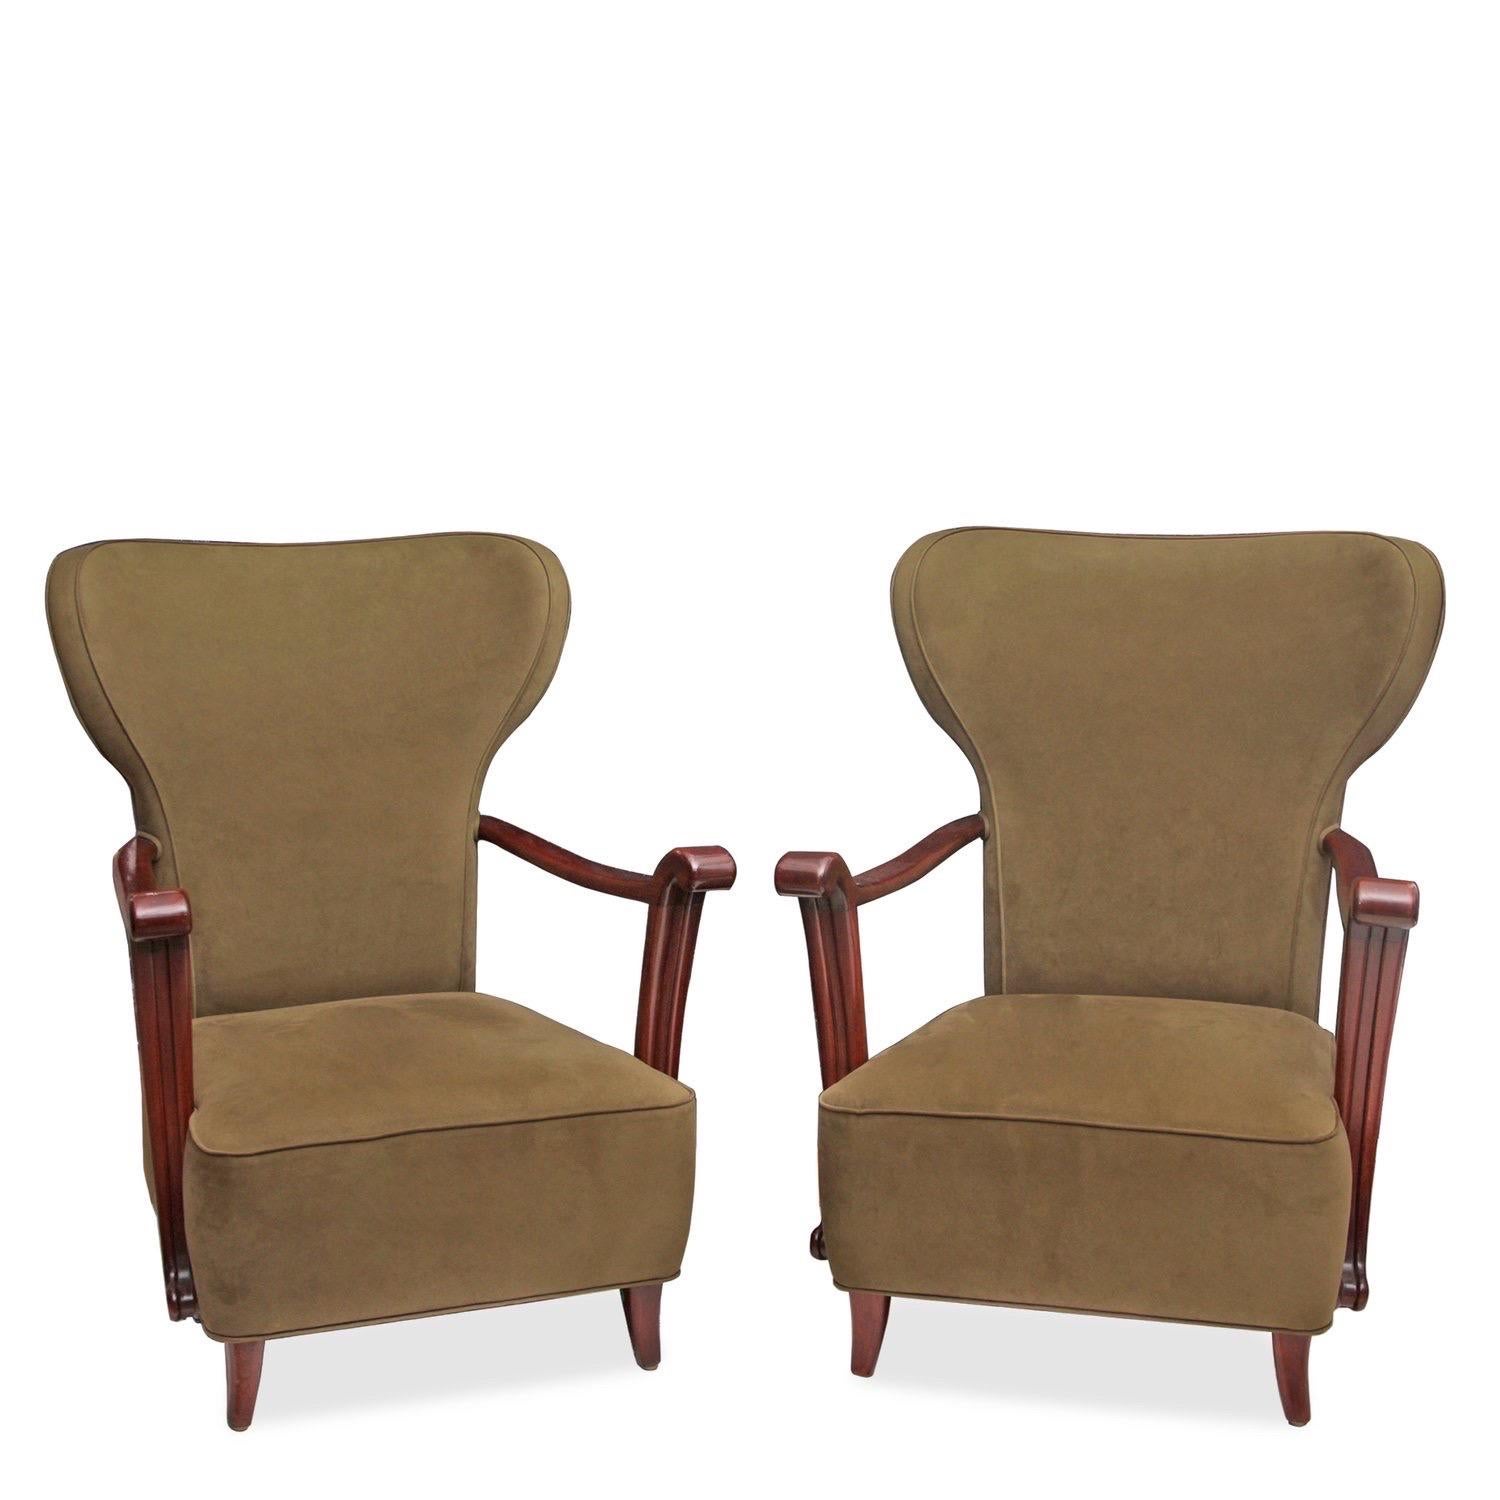 Matching pair of midcentury wingback-style lounge chairs with polished wood arms and olive green upholstery.

Italian, circa 1950.

Dimensions: 29”W x 28”D x 37.5”H - Seat Height: 14.5”H - Arm Height: 22”H